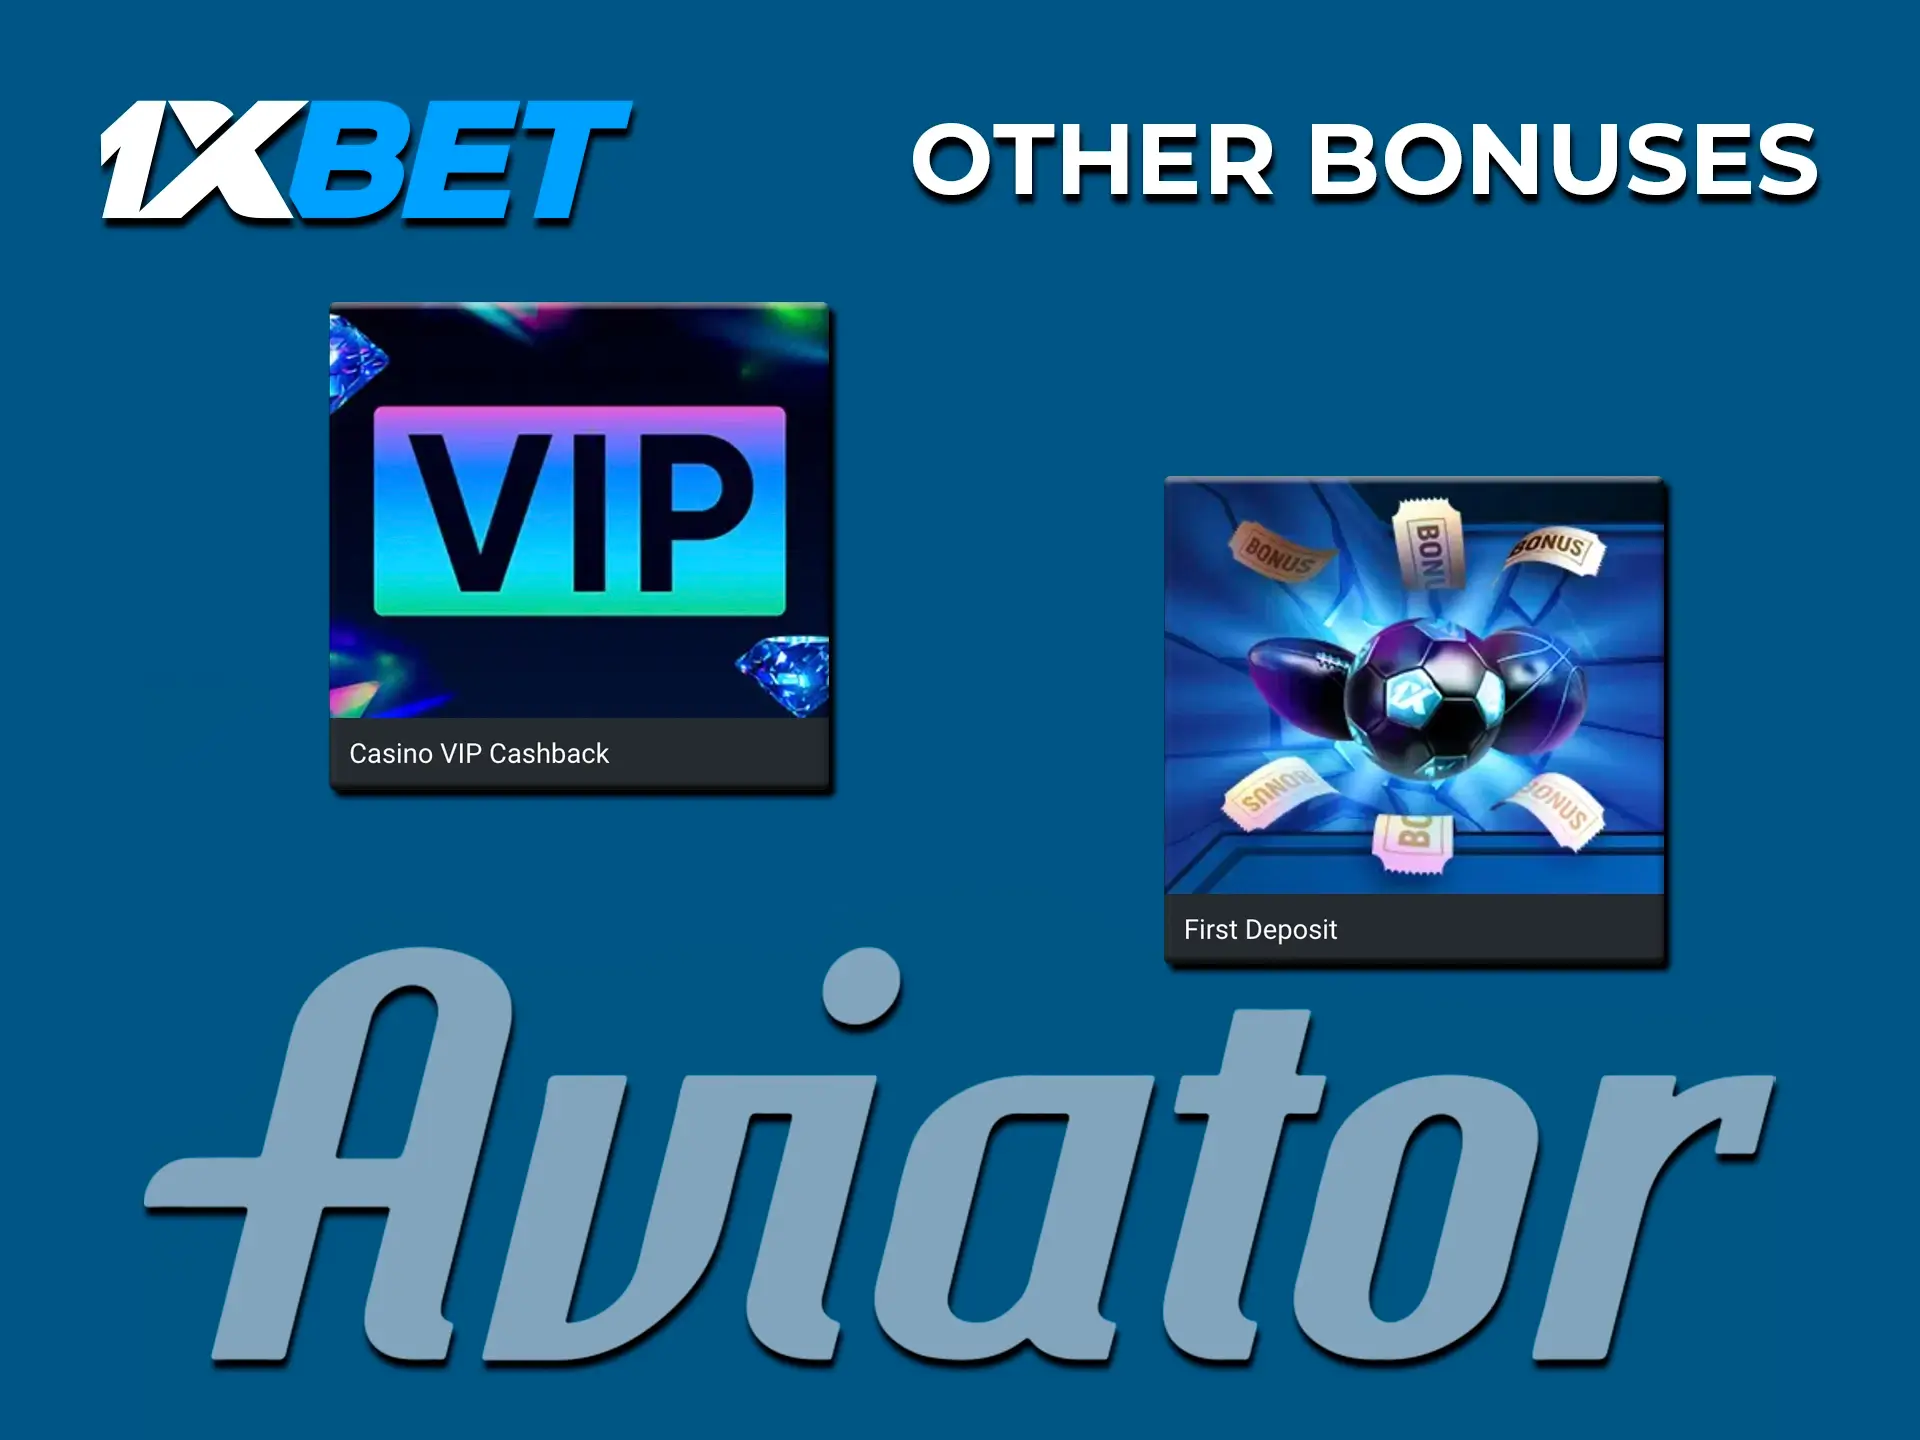 Choose and use bonuses from 1xBet that will help you when playing Aviator.